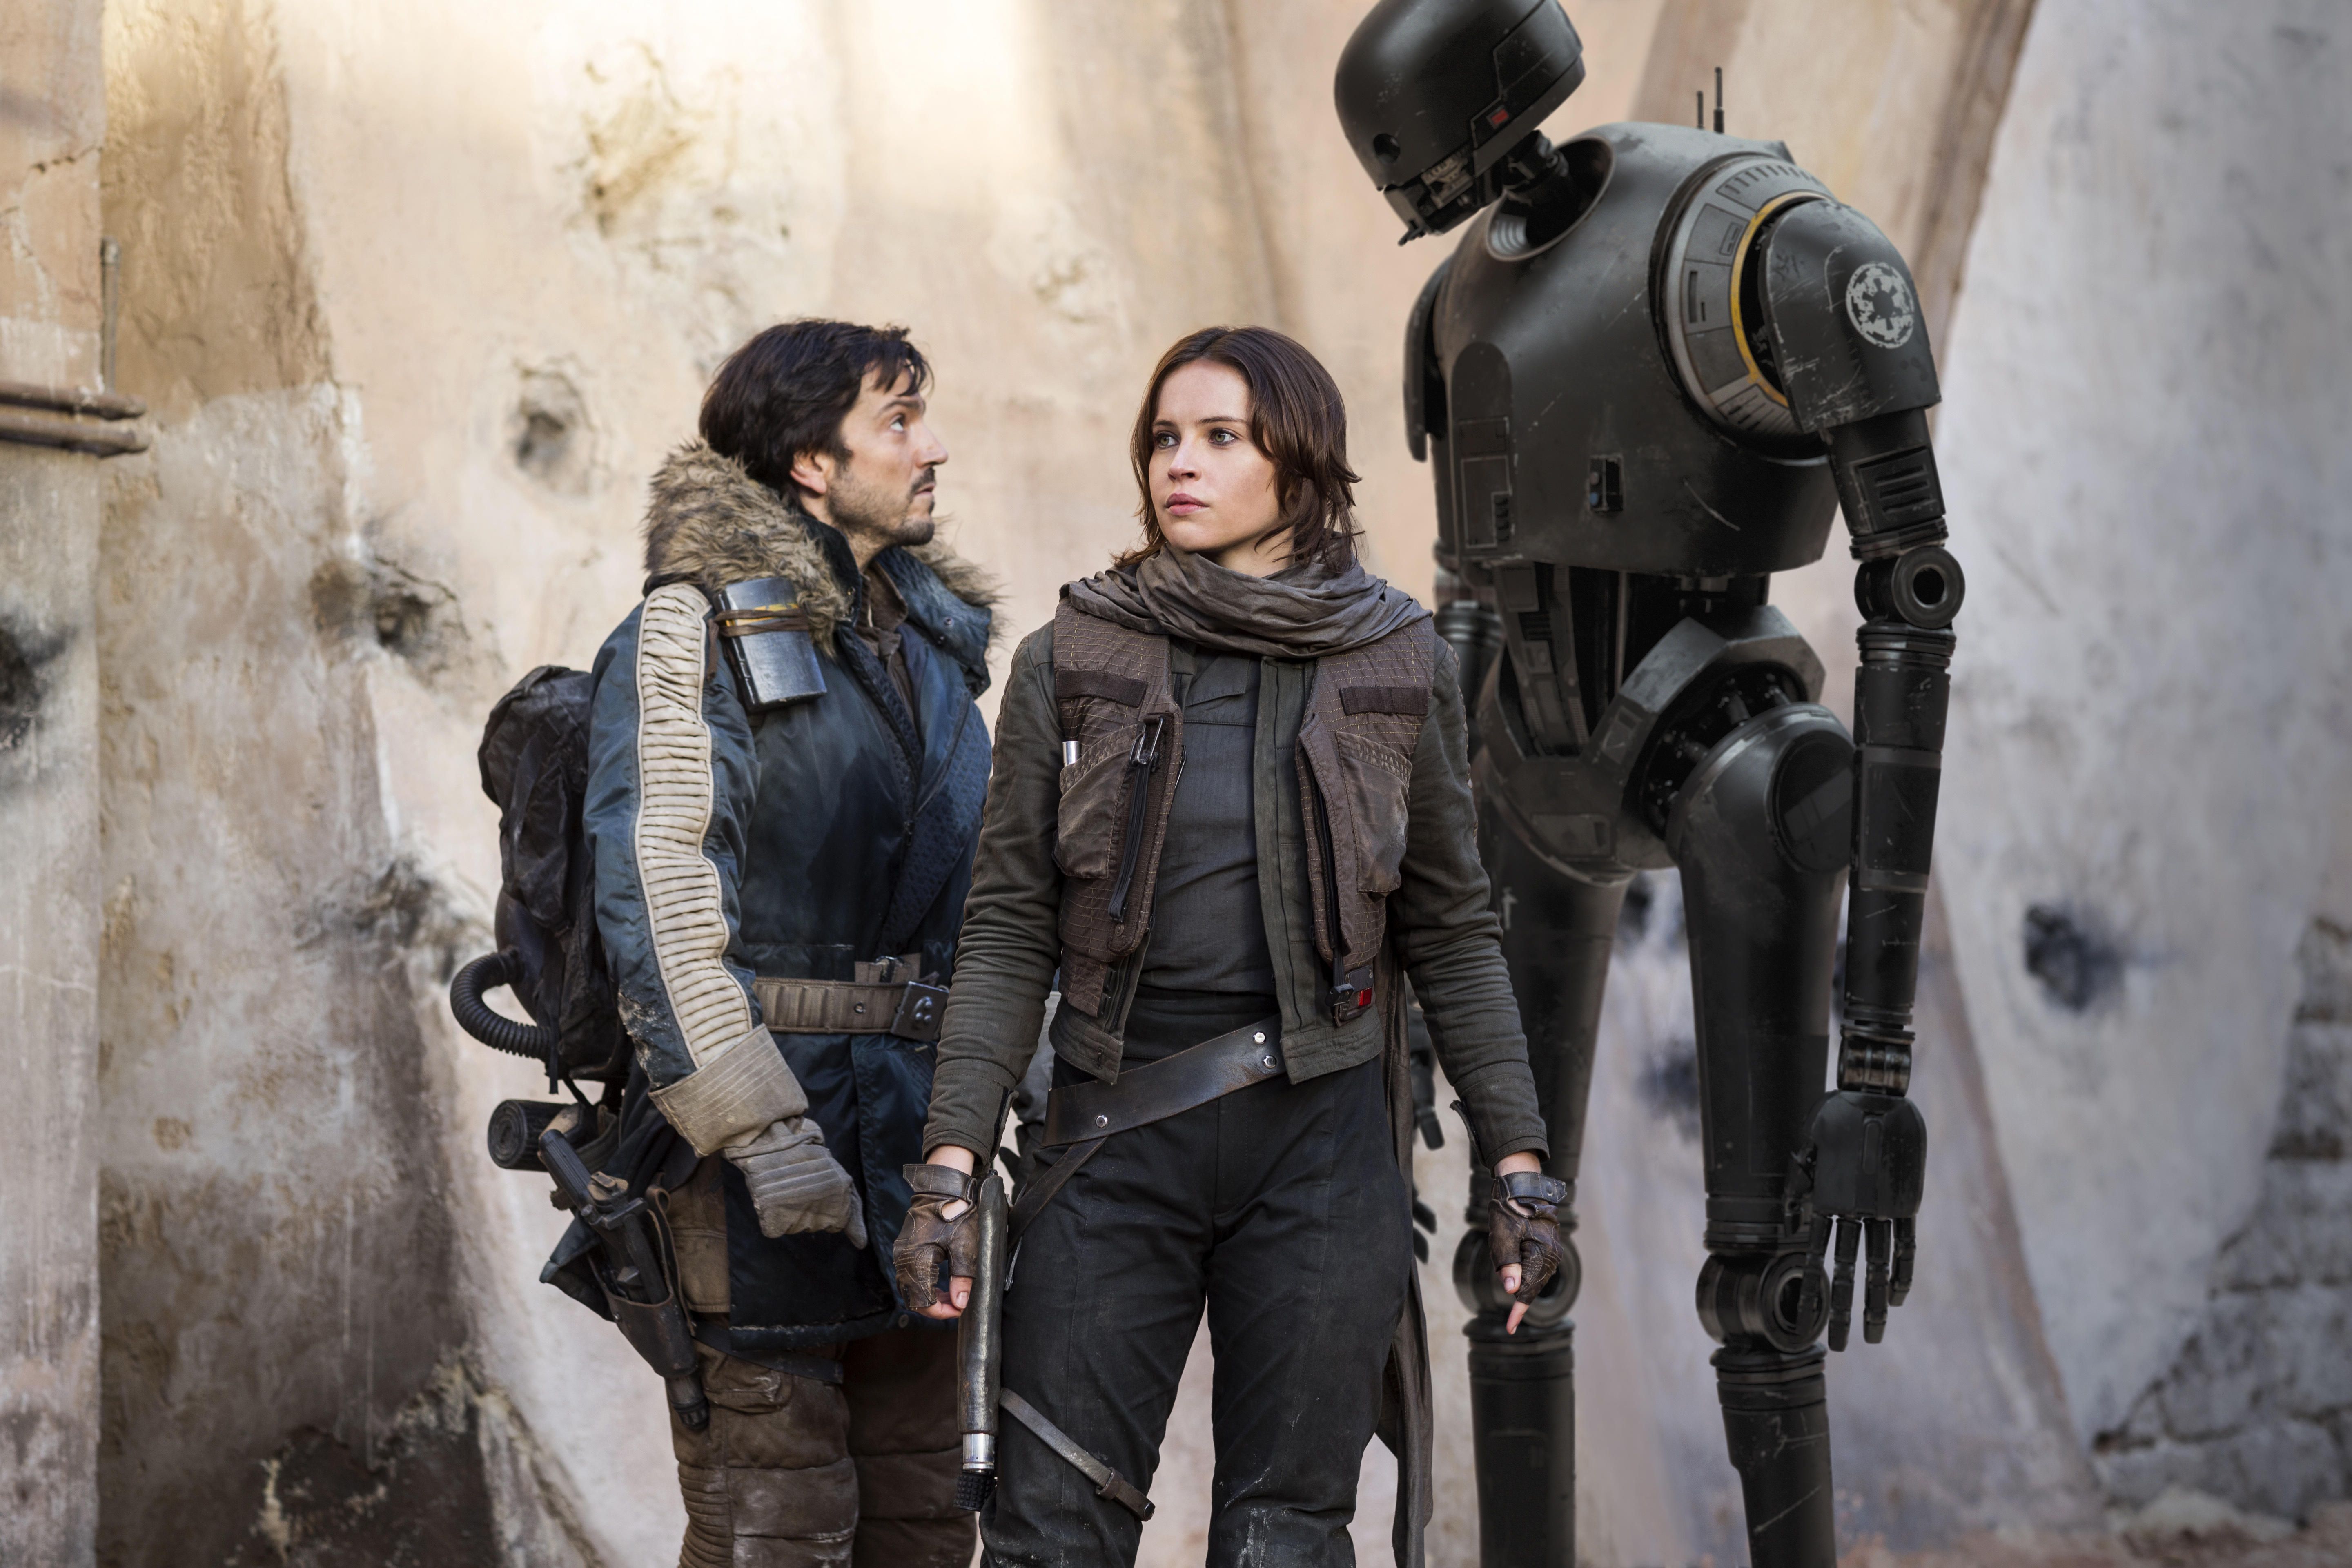 rogue one a star wars story, #movies, #star wars, k, movies